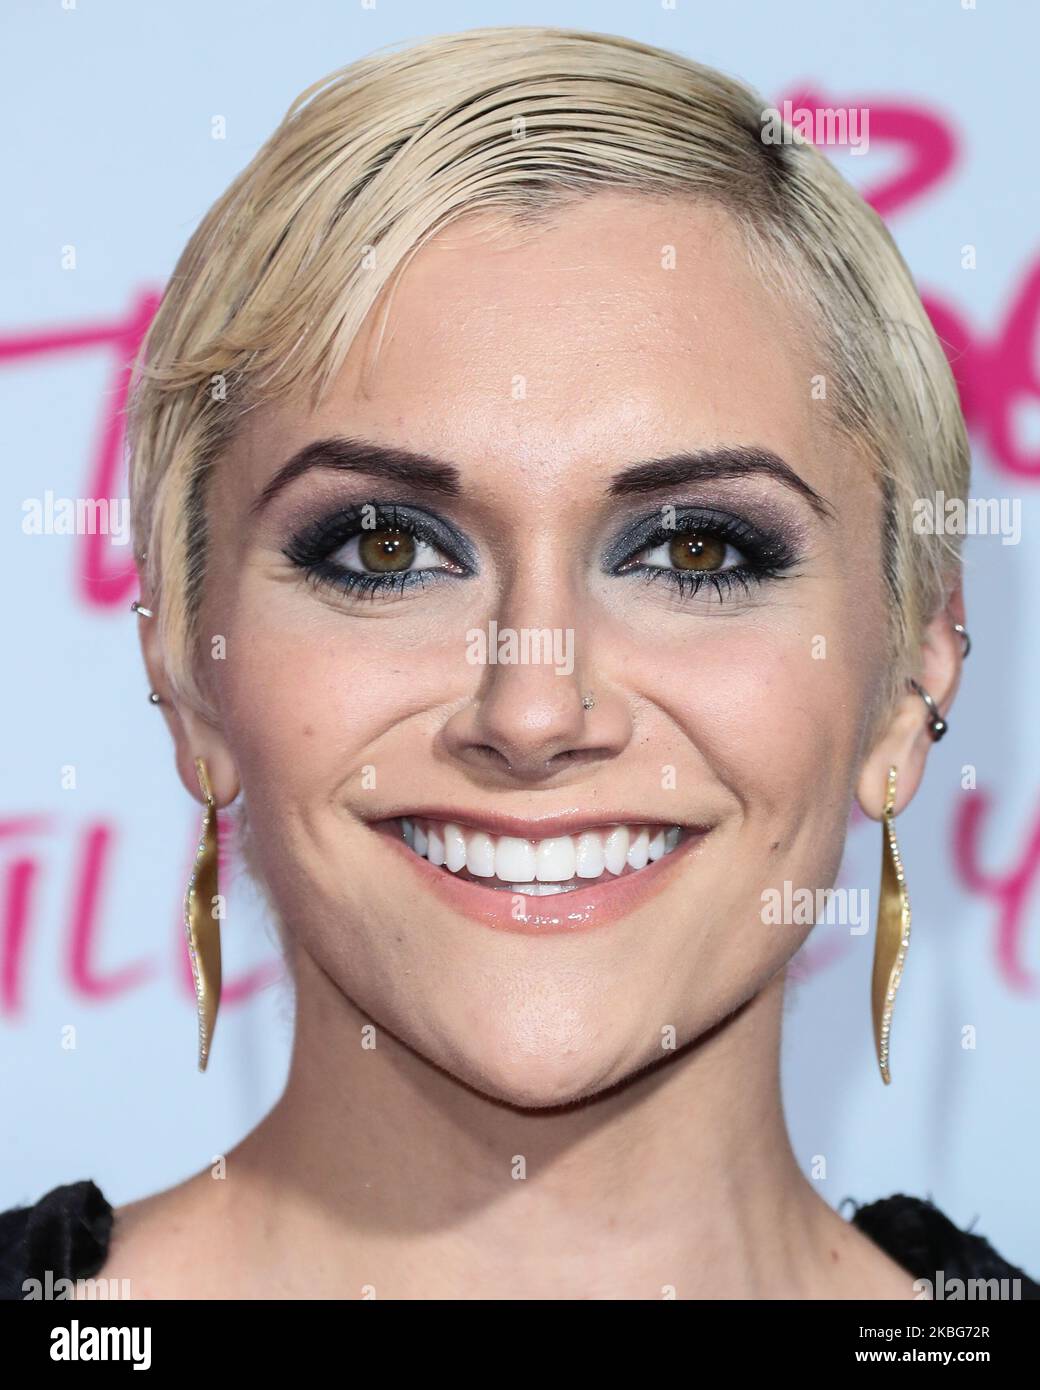 HOLLYWOOD, LOS ANGELES, CALIFORNIA, USA - FEBRUARY 03: Actress Alyson Stoner arrives at the Los Angeles Premiere Of Netflix's 'To All The Boys: P.S. I Still Love You' held at the Egyptian Theatre on February 3, 2020 in Hollywood, Los Angeles, California, United States. (Photo by Xavier Collin/Image Press Agency/NurPhoto) Stock Photo